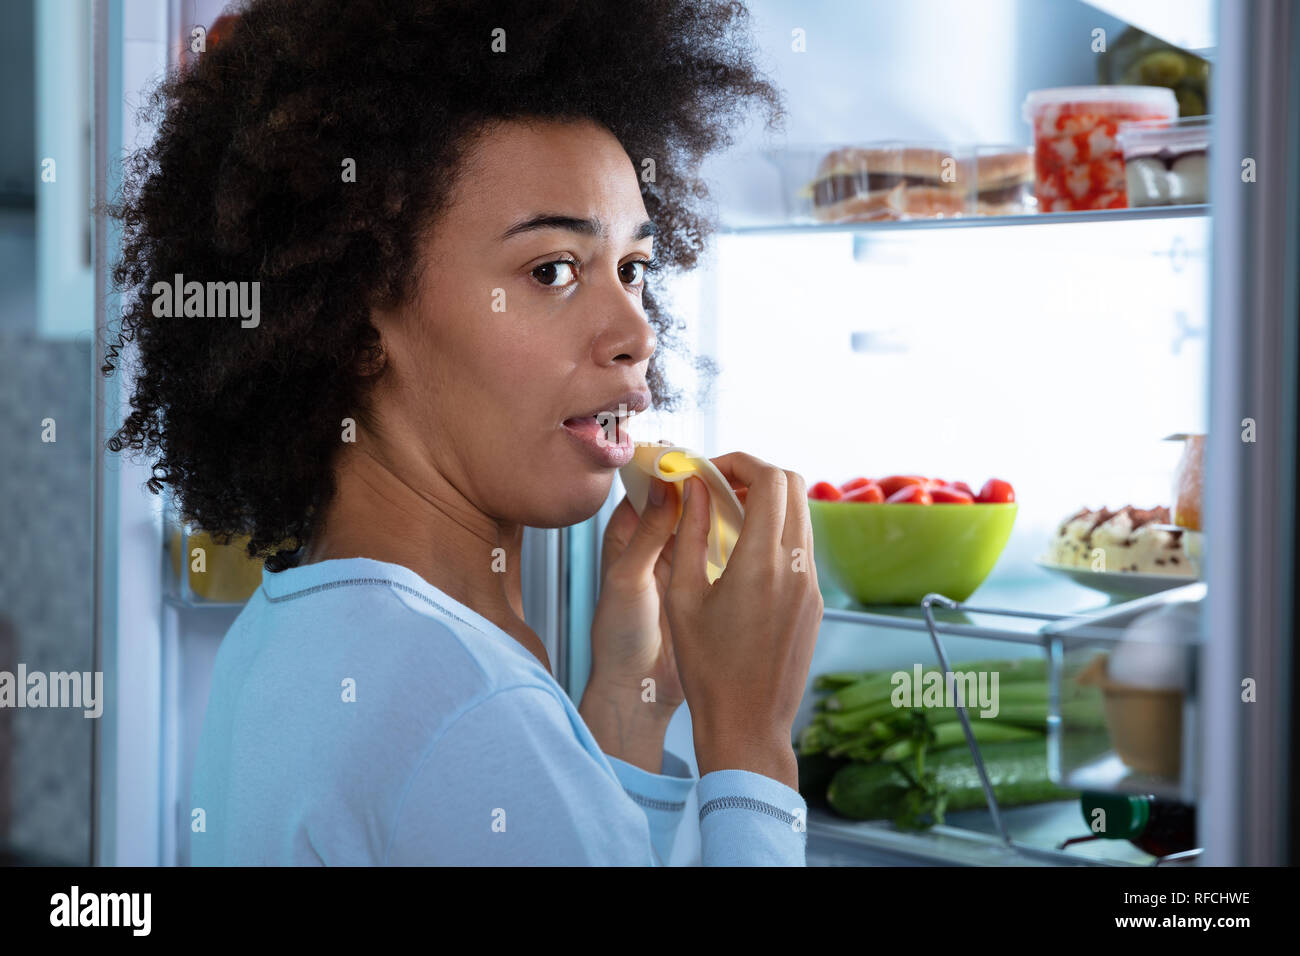 Young African Woman Eating Slice Of Cheese Near An Open Refrigerator Stock Photo